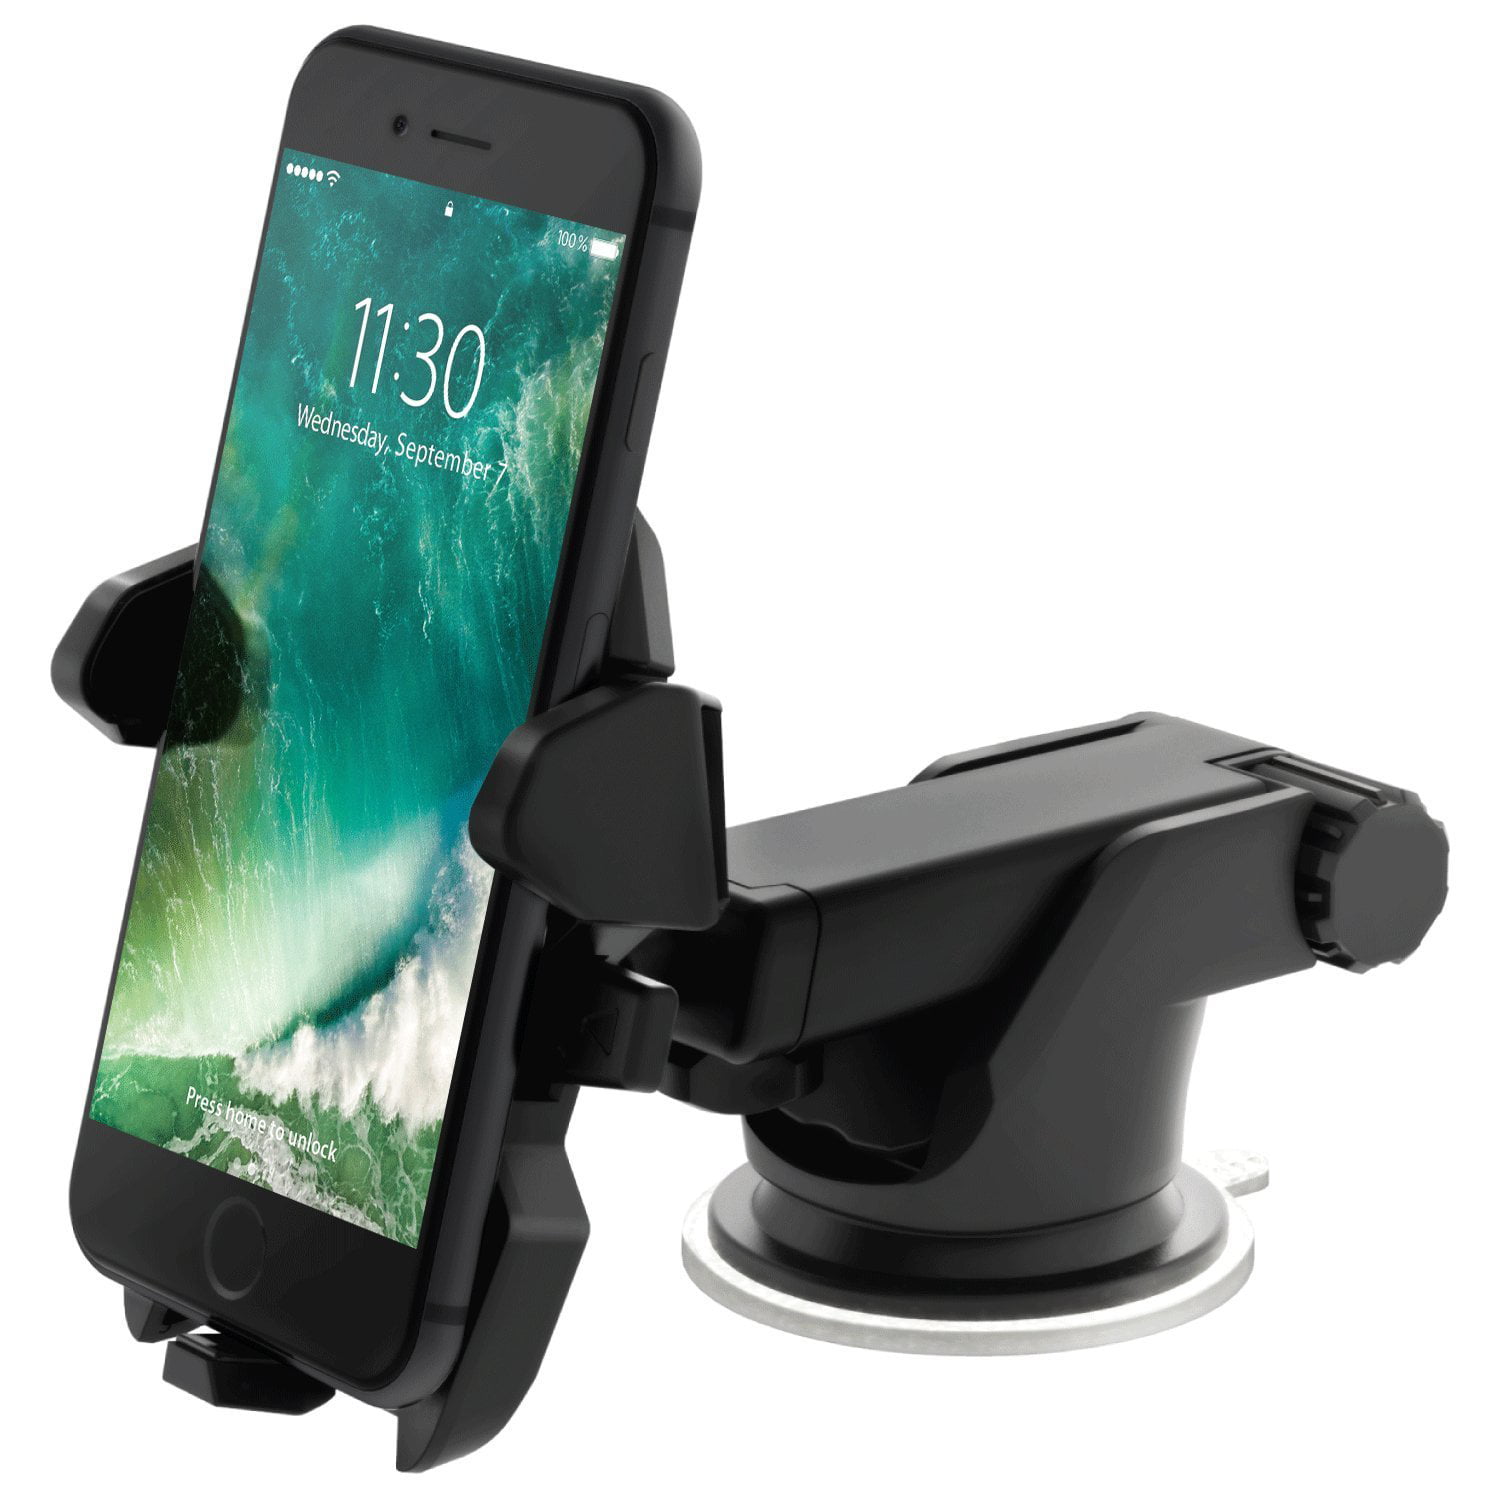 Universal Car Mount Holder for iPhone Samsung Galaxy S3 S4 S5 Mobile Phone GPS 